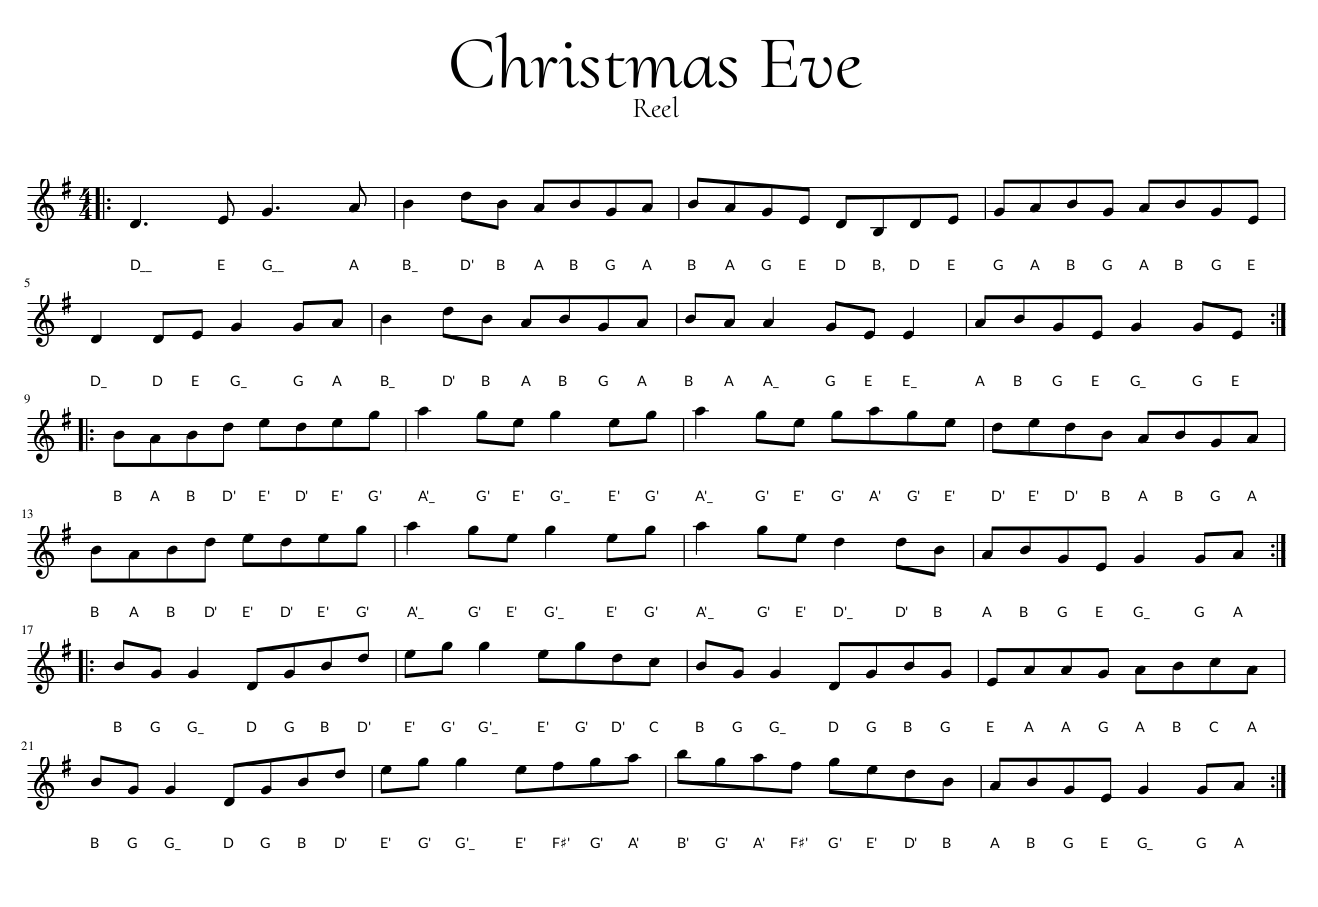 Image Showing Notation for Reel Christmas Eve